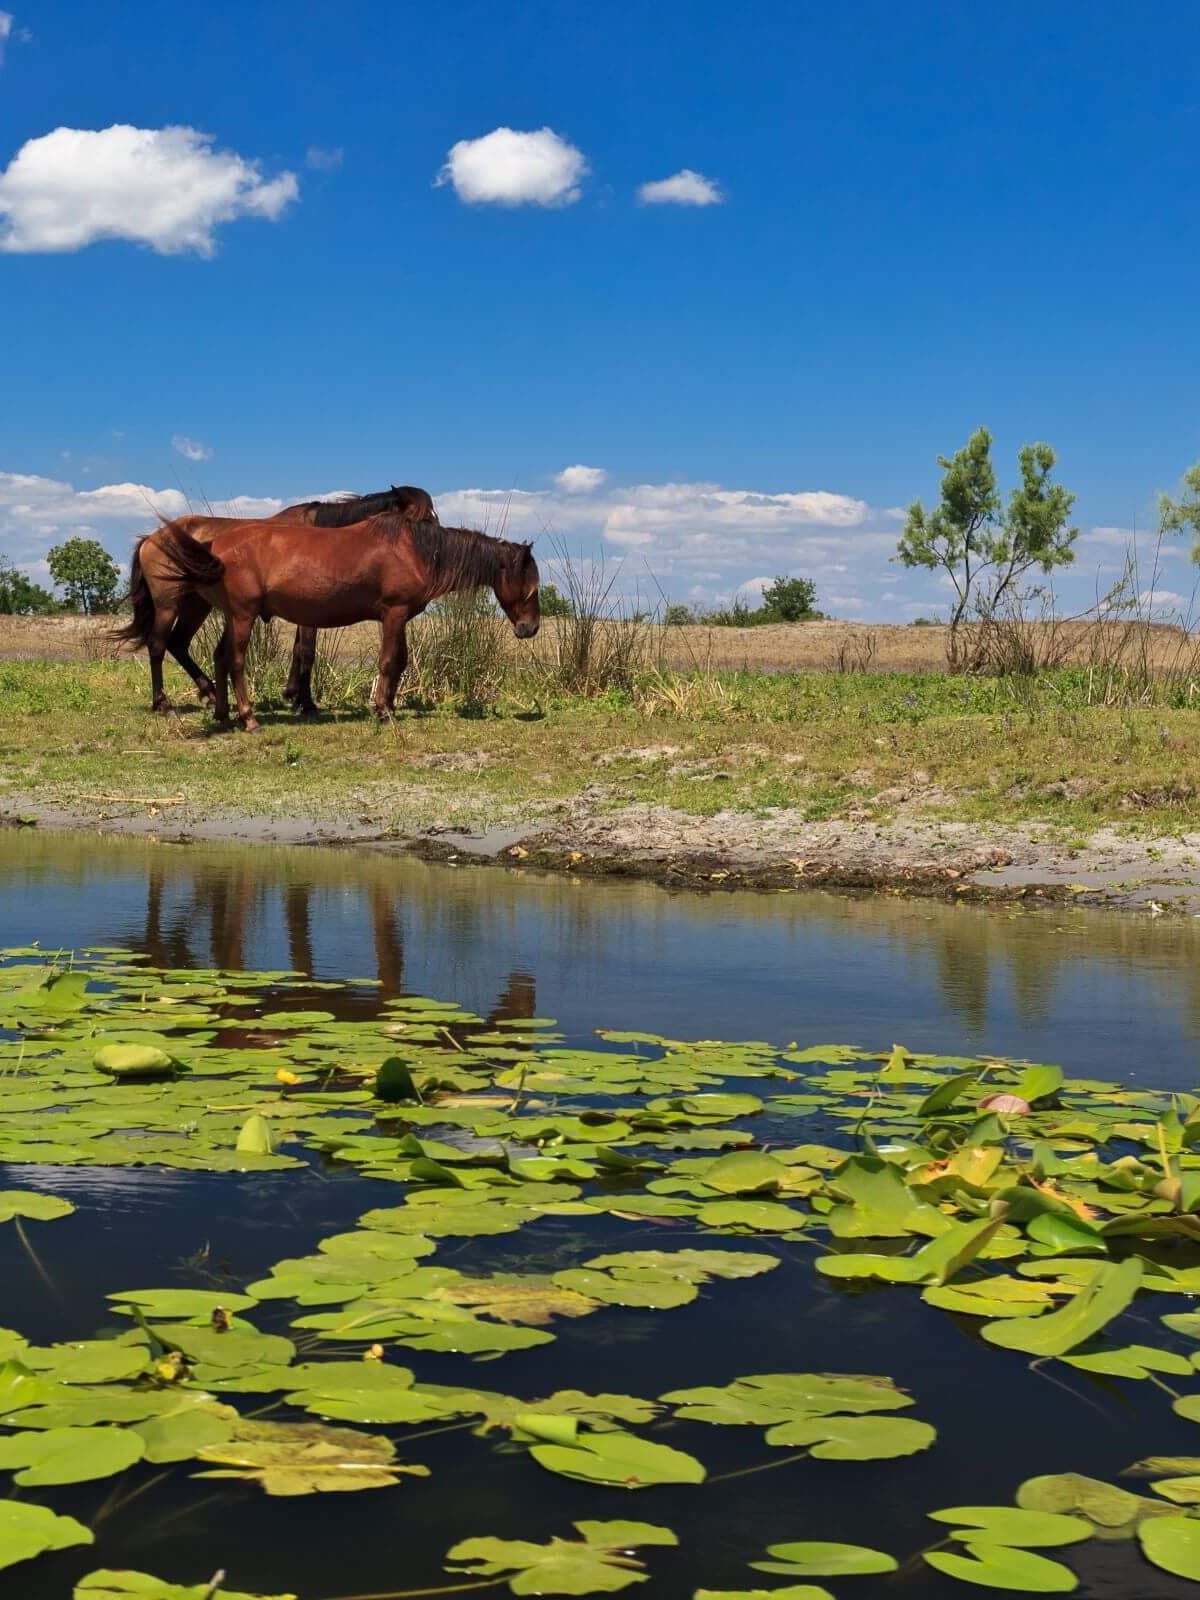 Lily pads on the river and horses in the Danube Delta, Romania